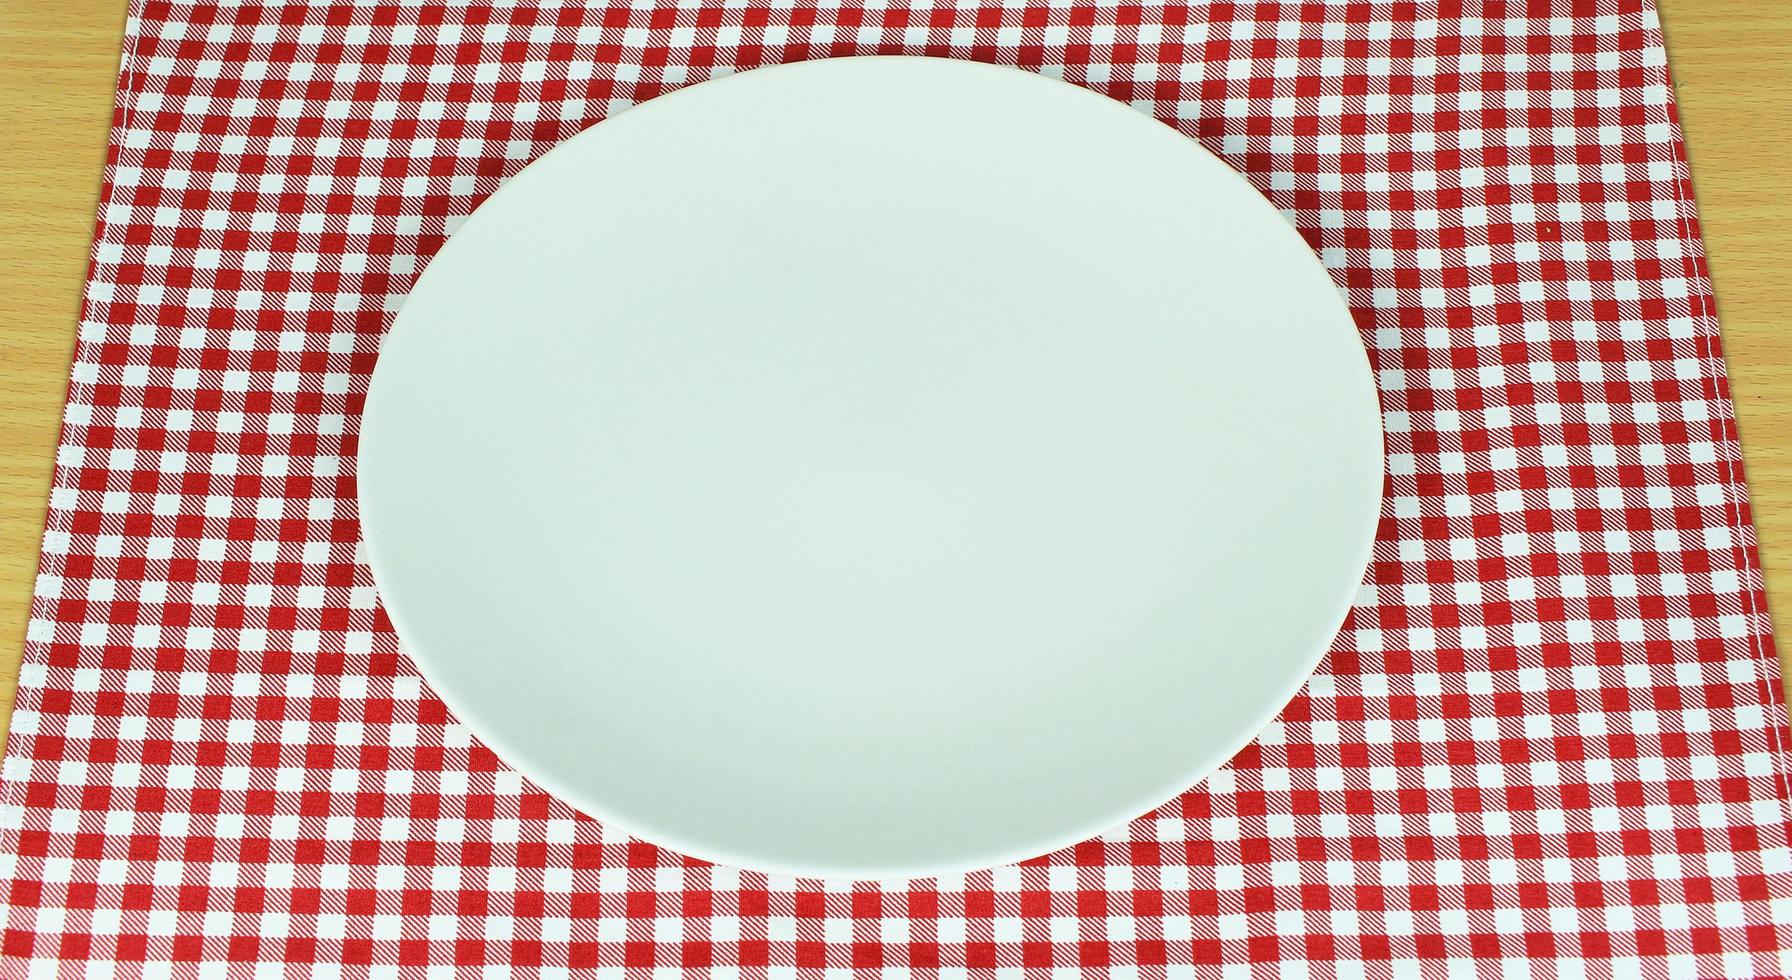 White plate on red cloth photo